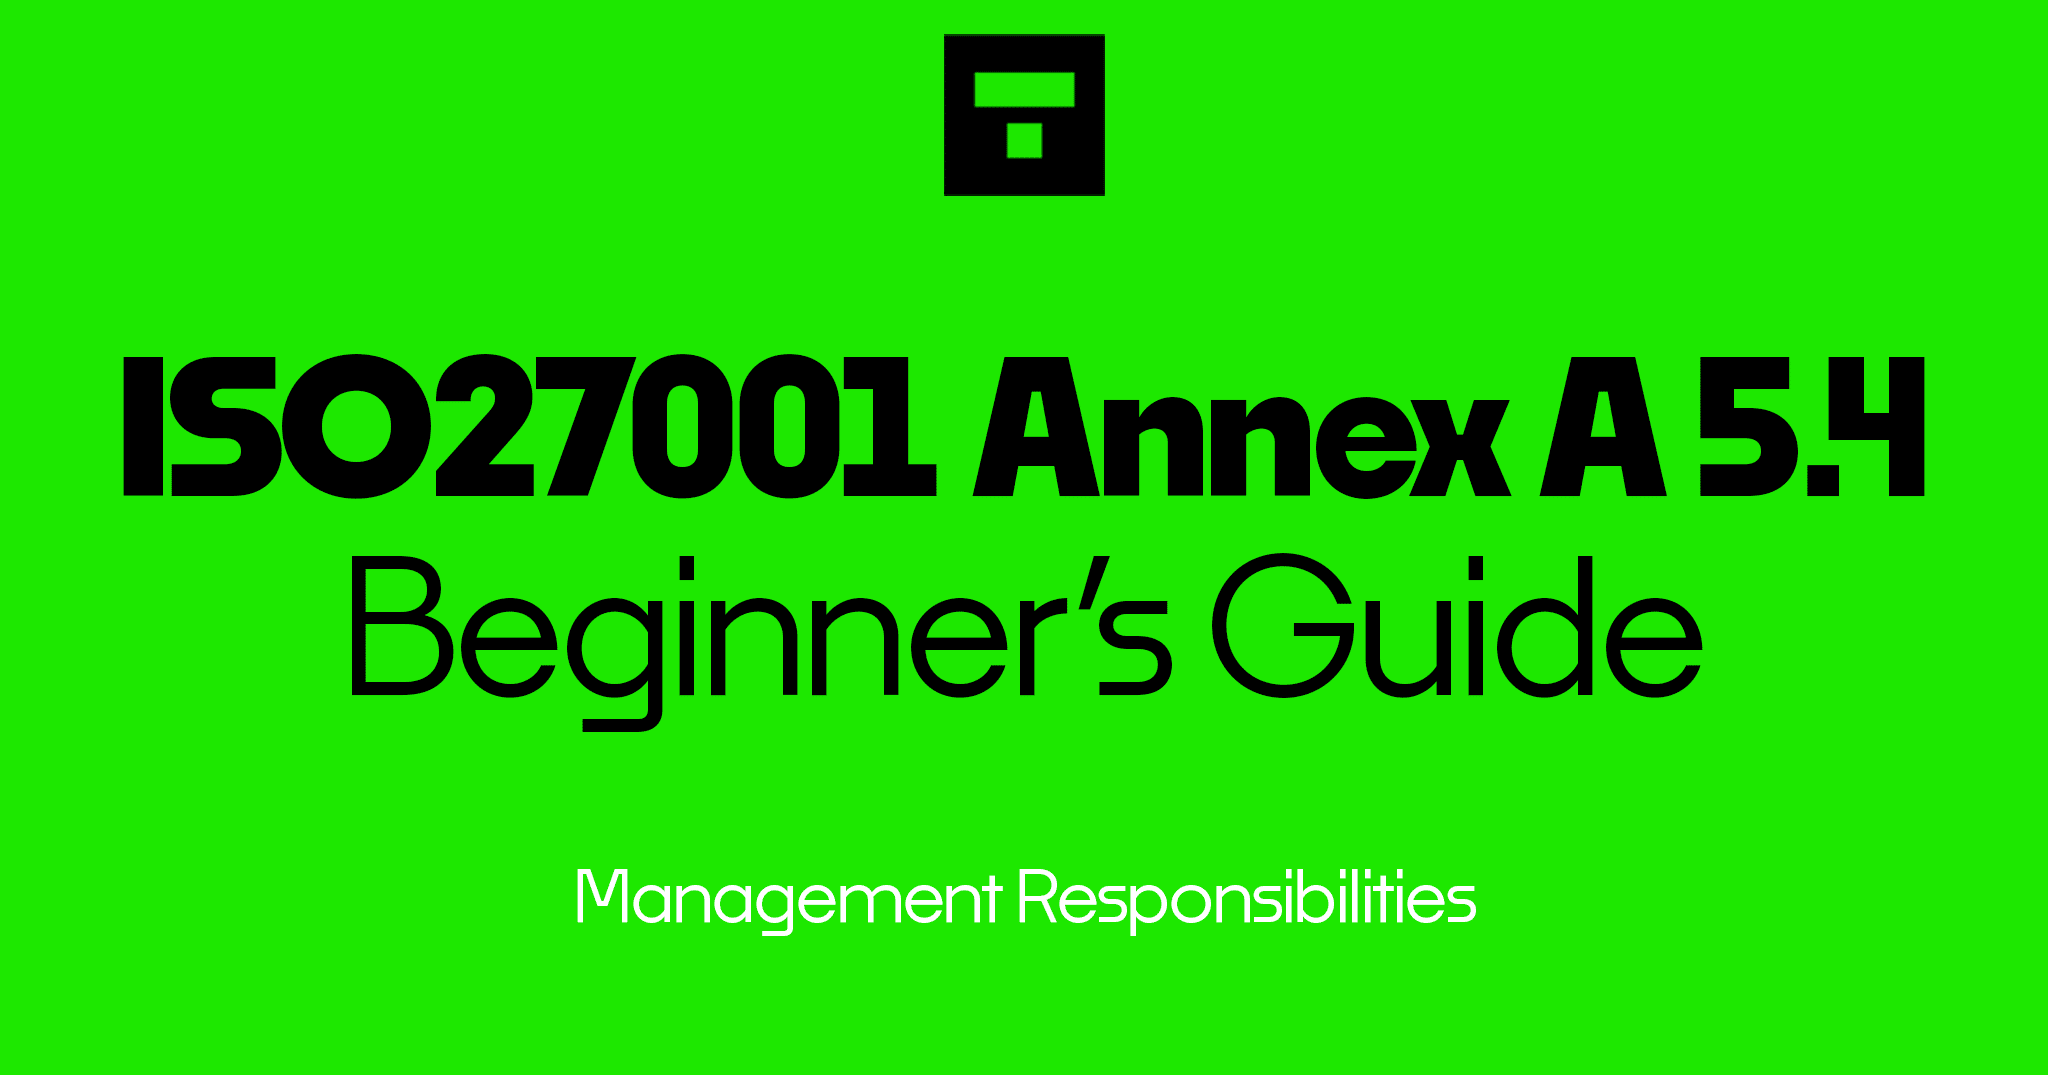 ISO 27001 Annex A 5.4 Management Responsibilities Beginner’s Guide